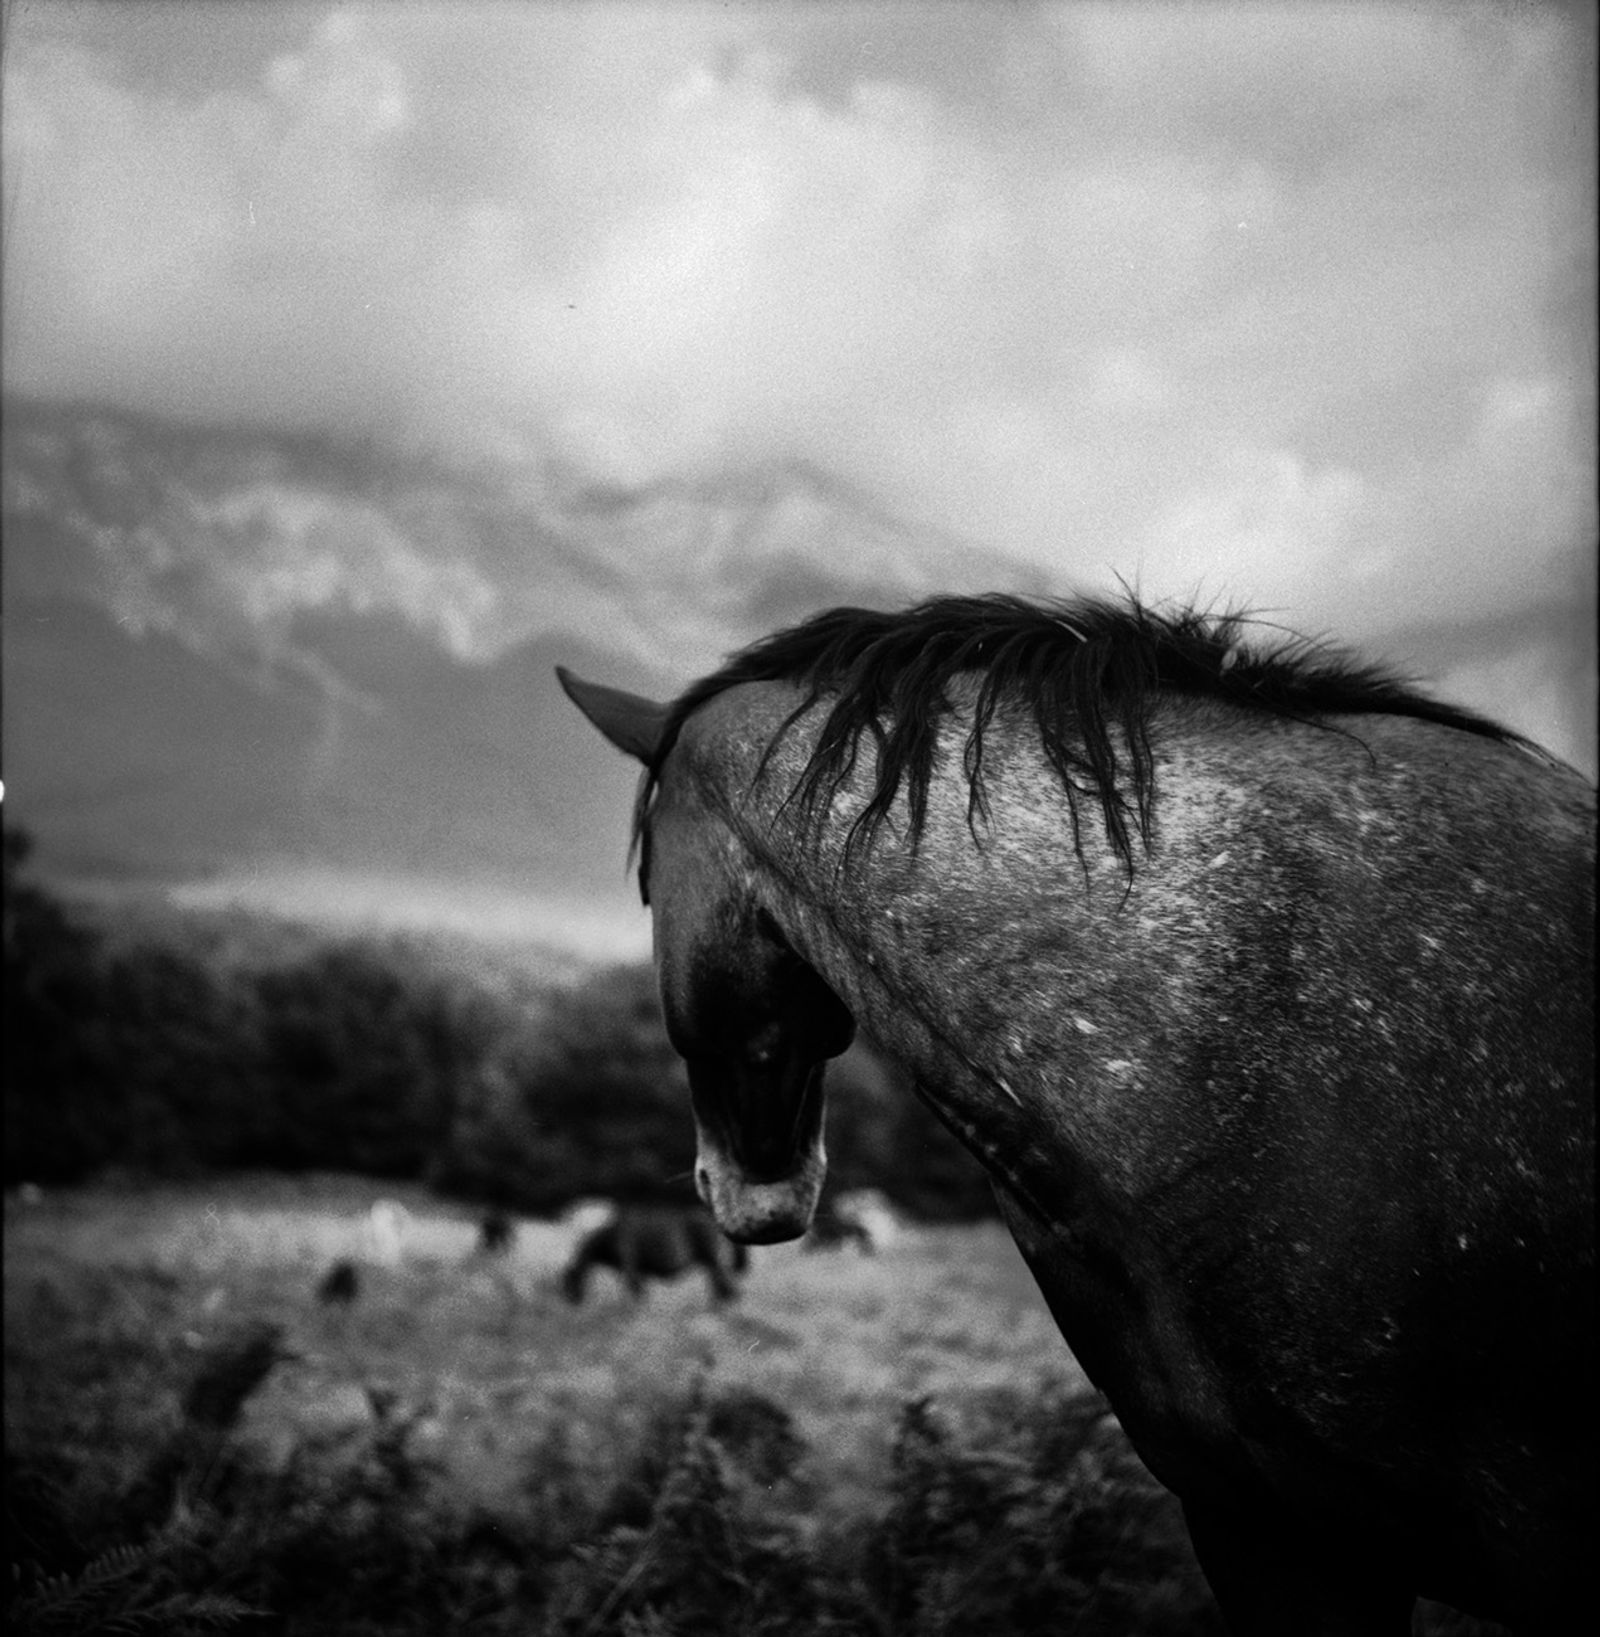 © Sabrina Caramanico - Image from the The Secrets of the Mother Mountain photography project